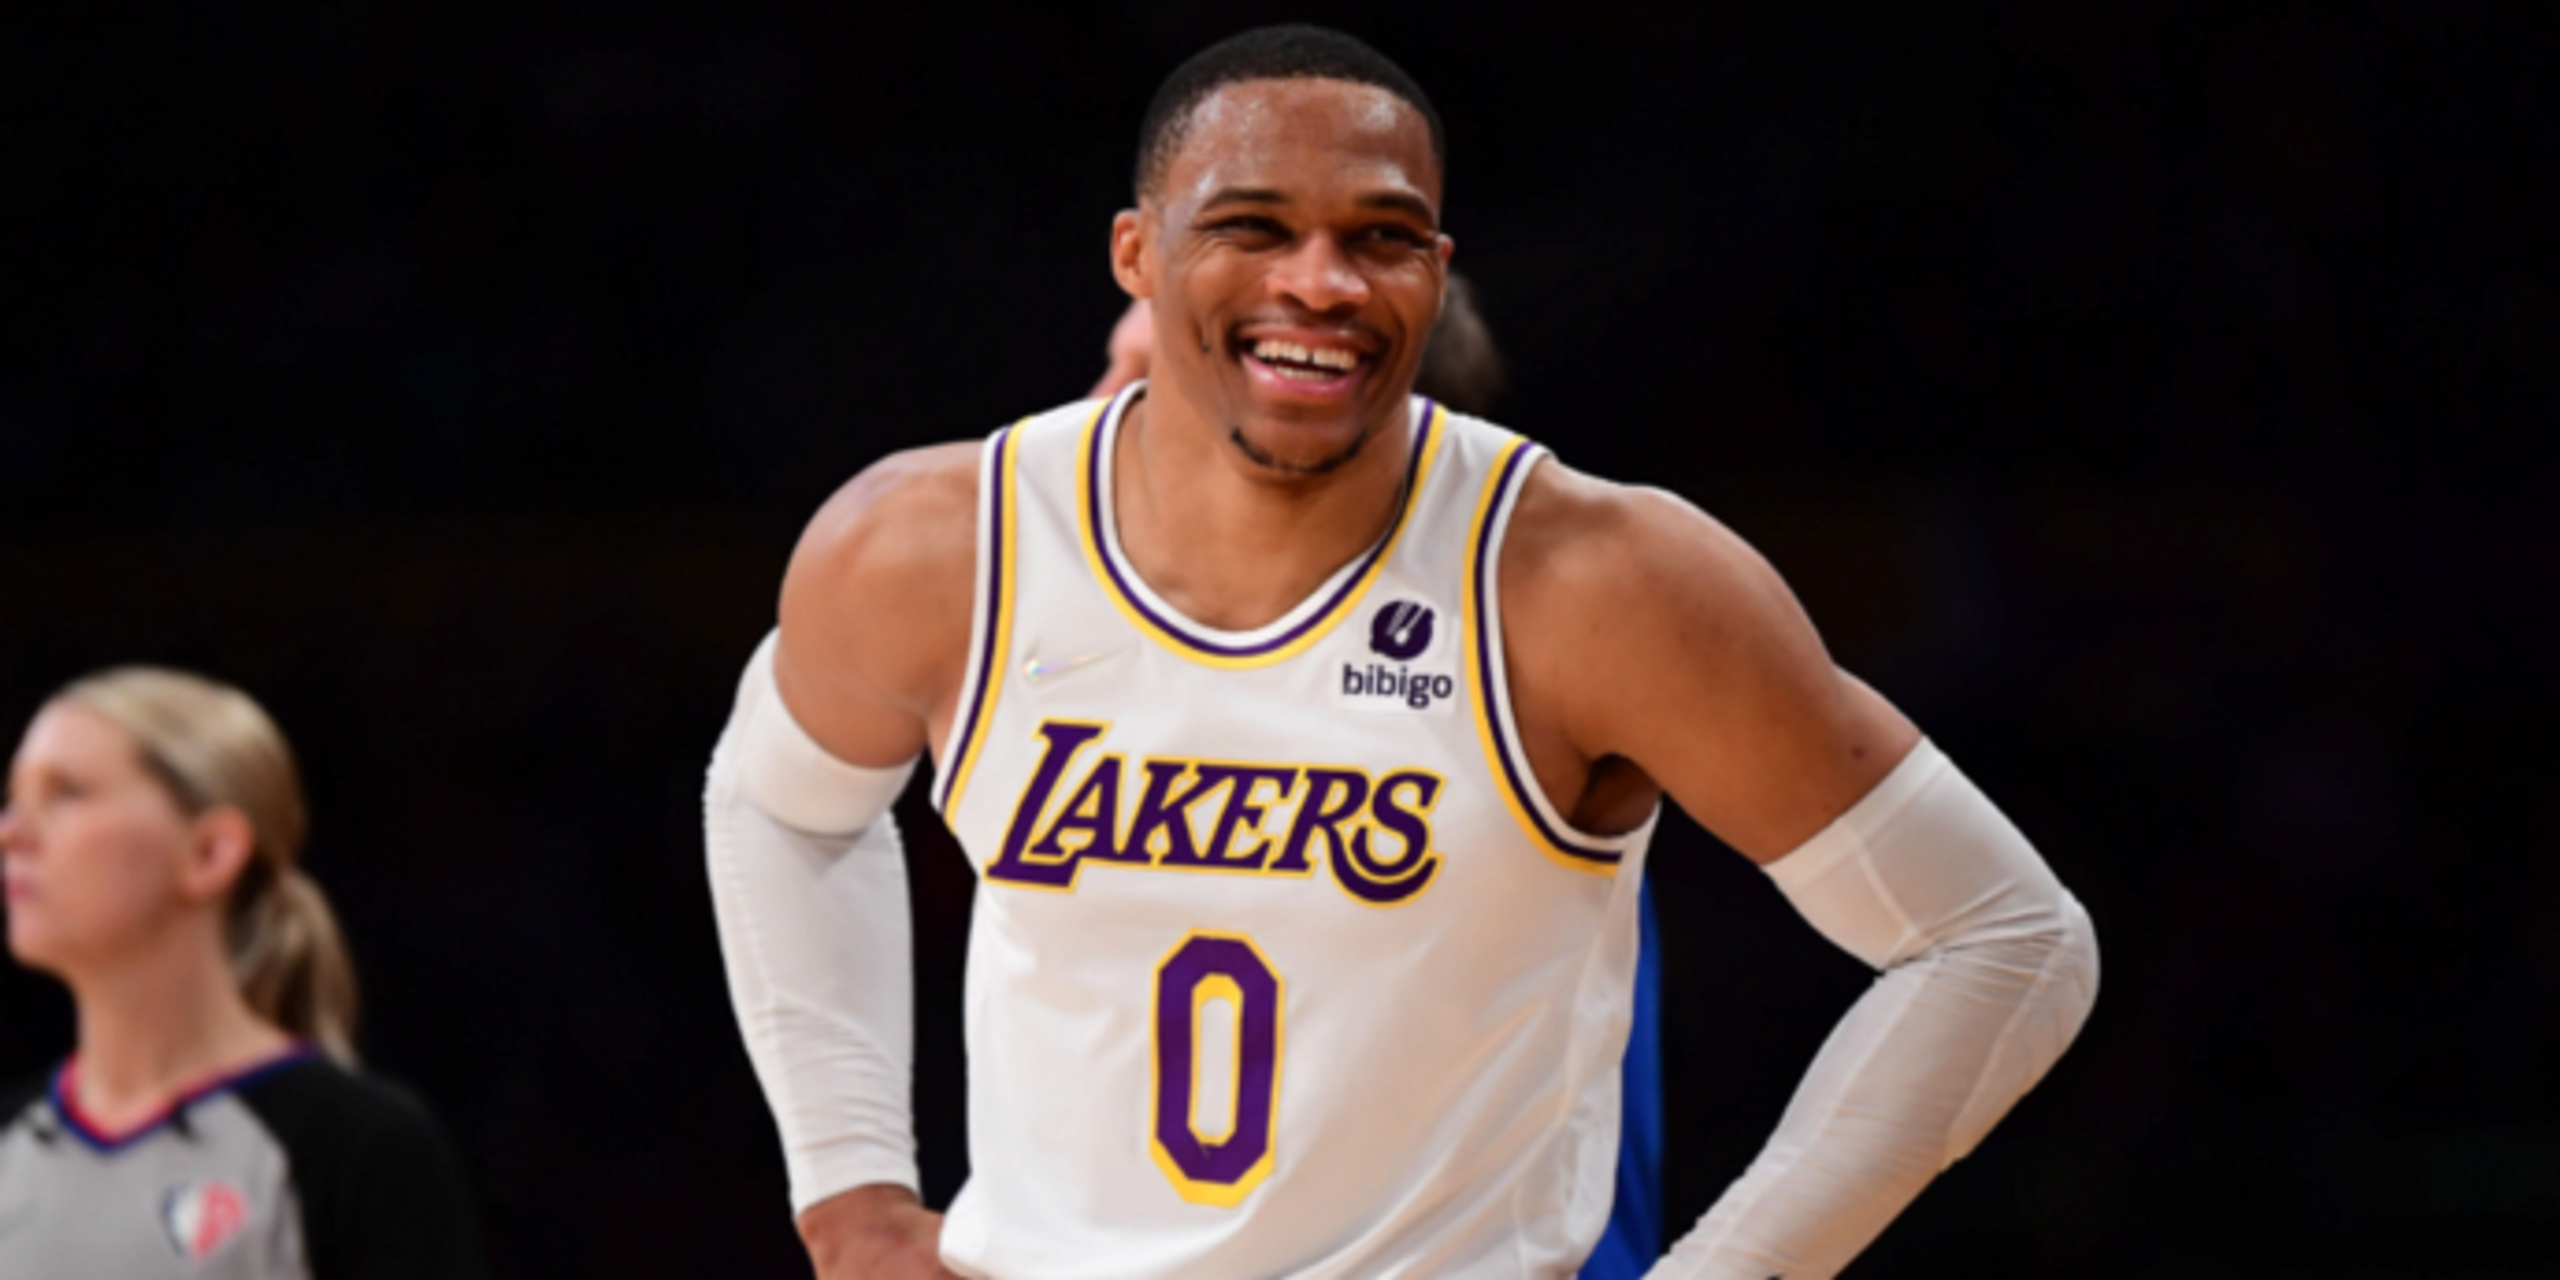 Russell Westbrook has unfairly been made the Lakers' scapegoat